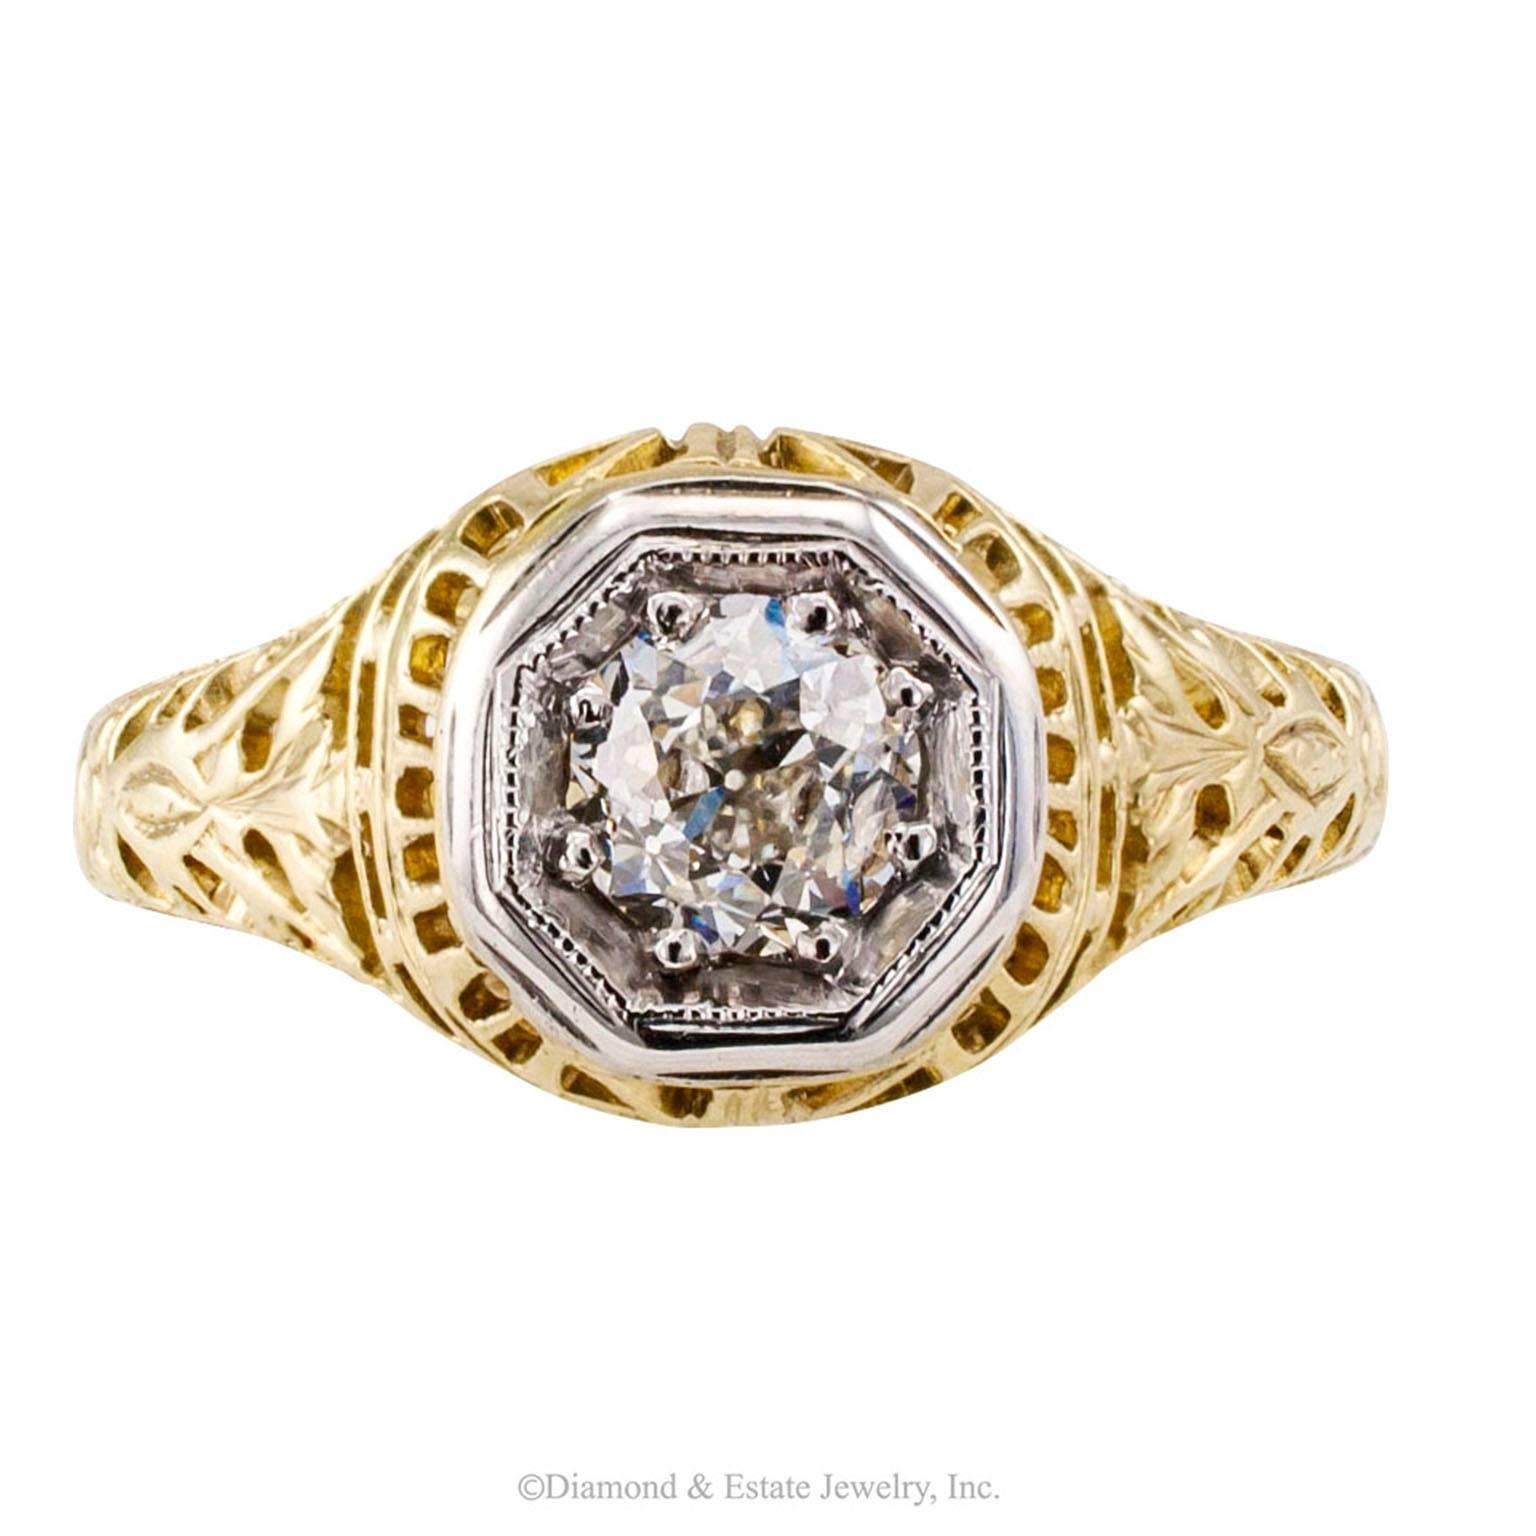 Old Mine-cut Diamond 0.35 Carat Art Deco Gold Engagement Ring

Art Deco 0.35 carat old mine-cut diamond solitaire mounted in two-tone gold circa 1930.  Authentic Art Deco engagement ring crafted in 14-karat yellow gold, crowned by a contrasting,